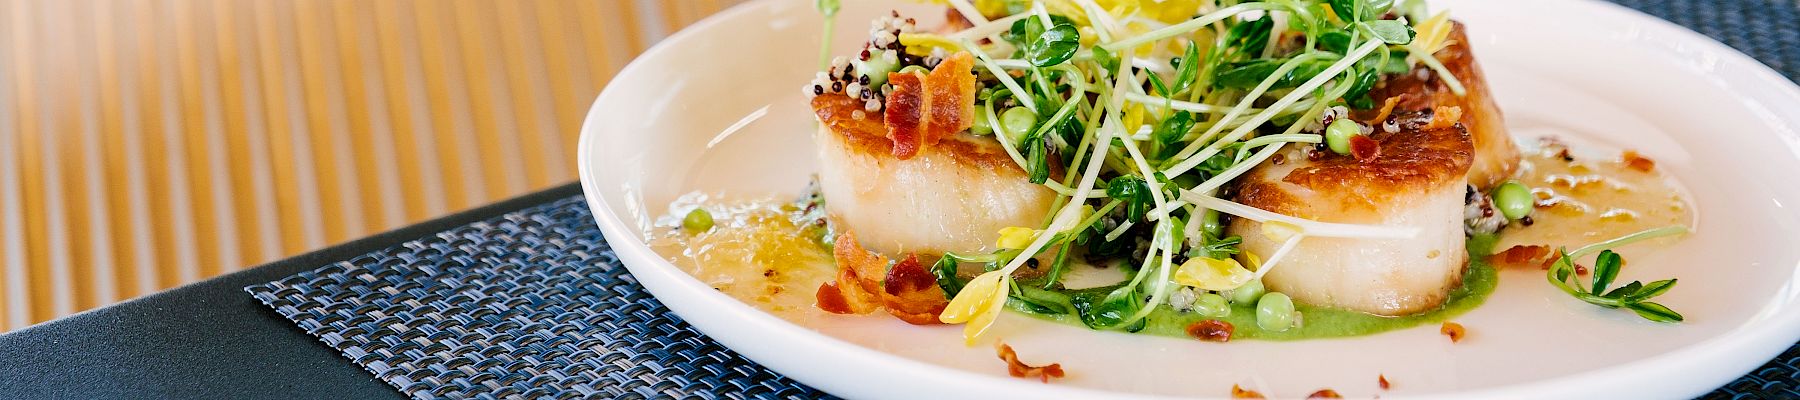 The image shows a plate of gourmet food, possibly seared scallops, garnished with greens and microgreens, placed on a blue woven placemat on a table.